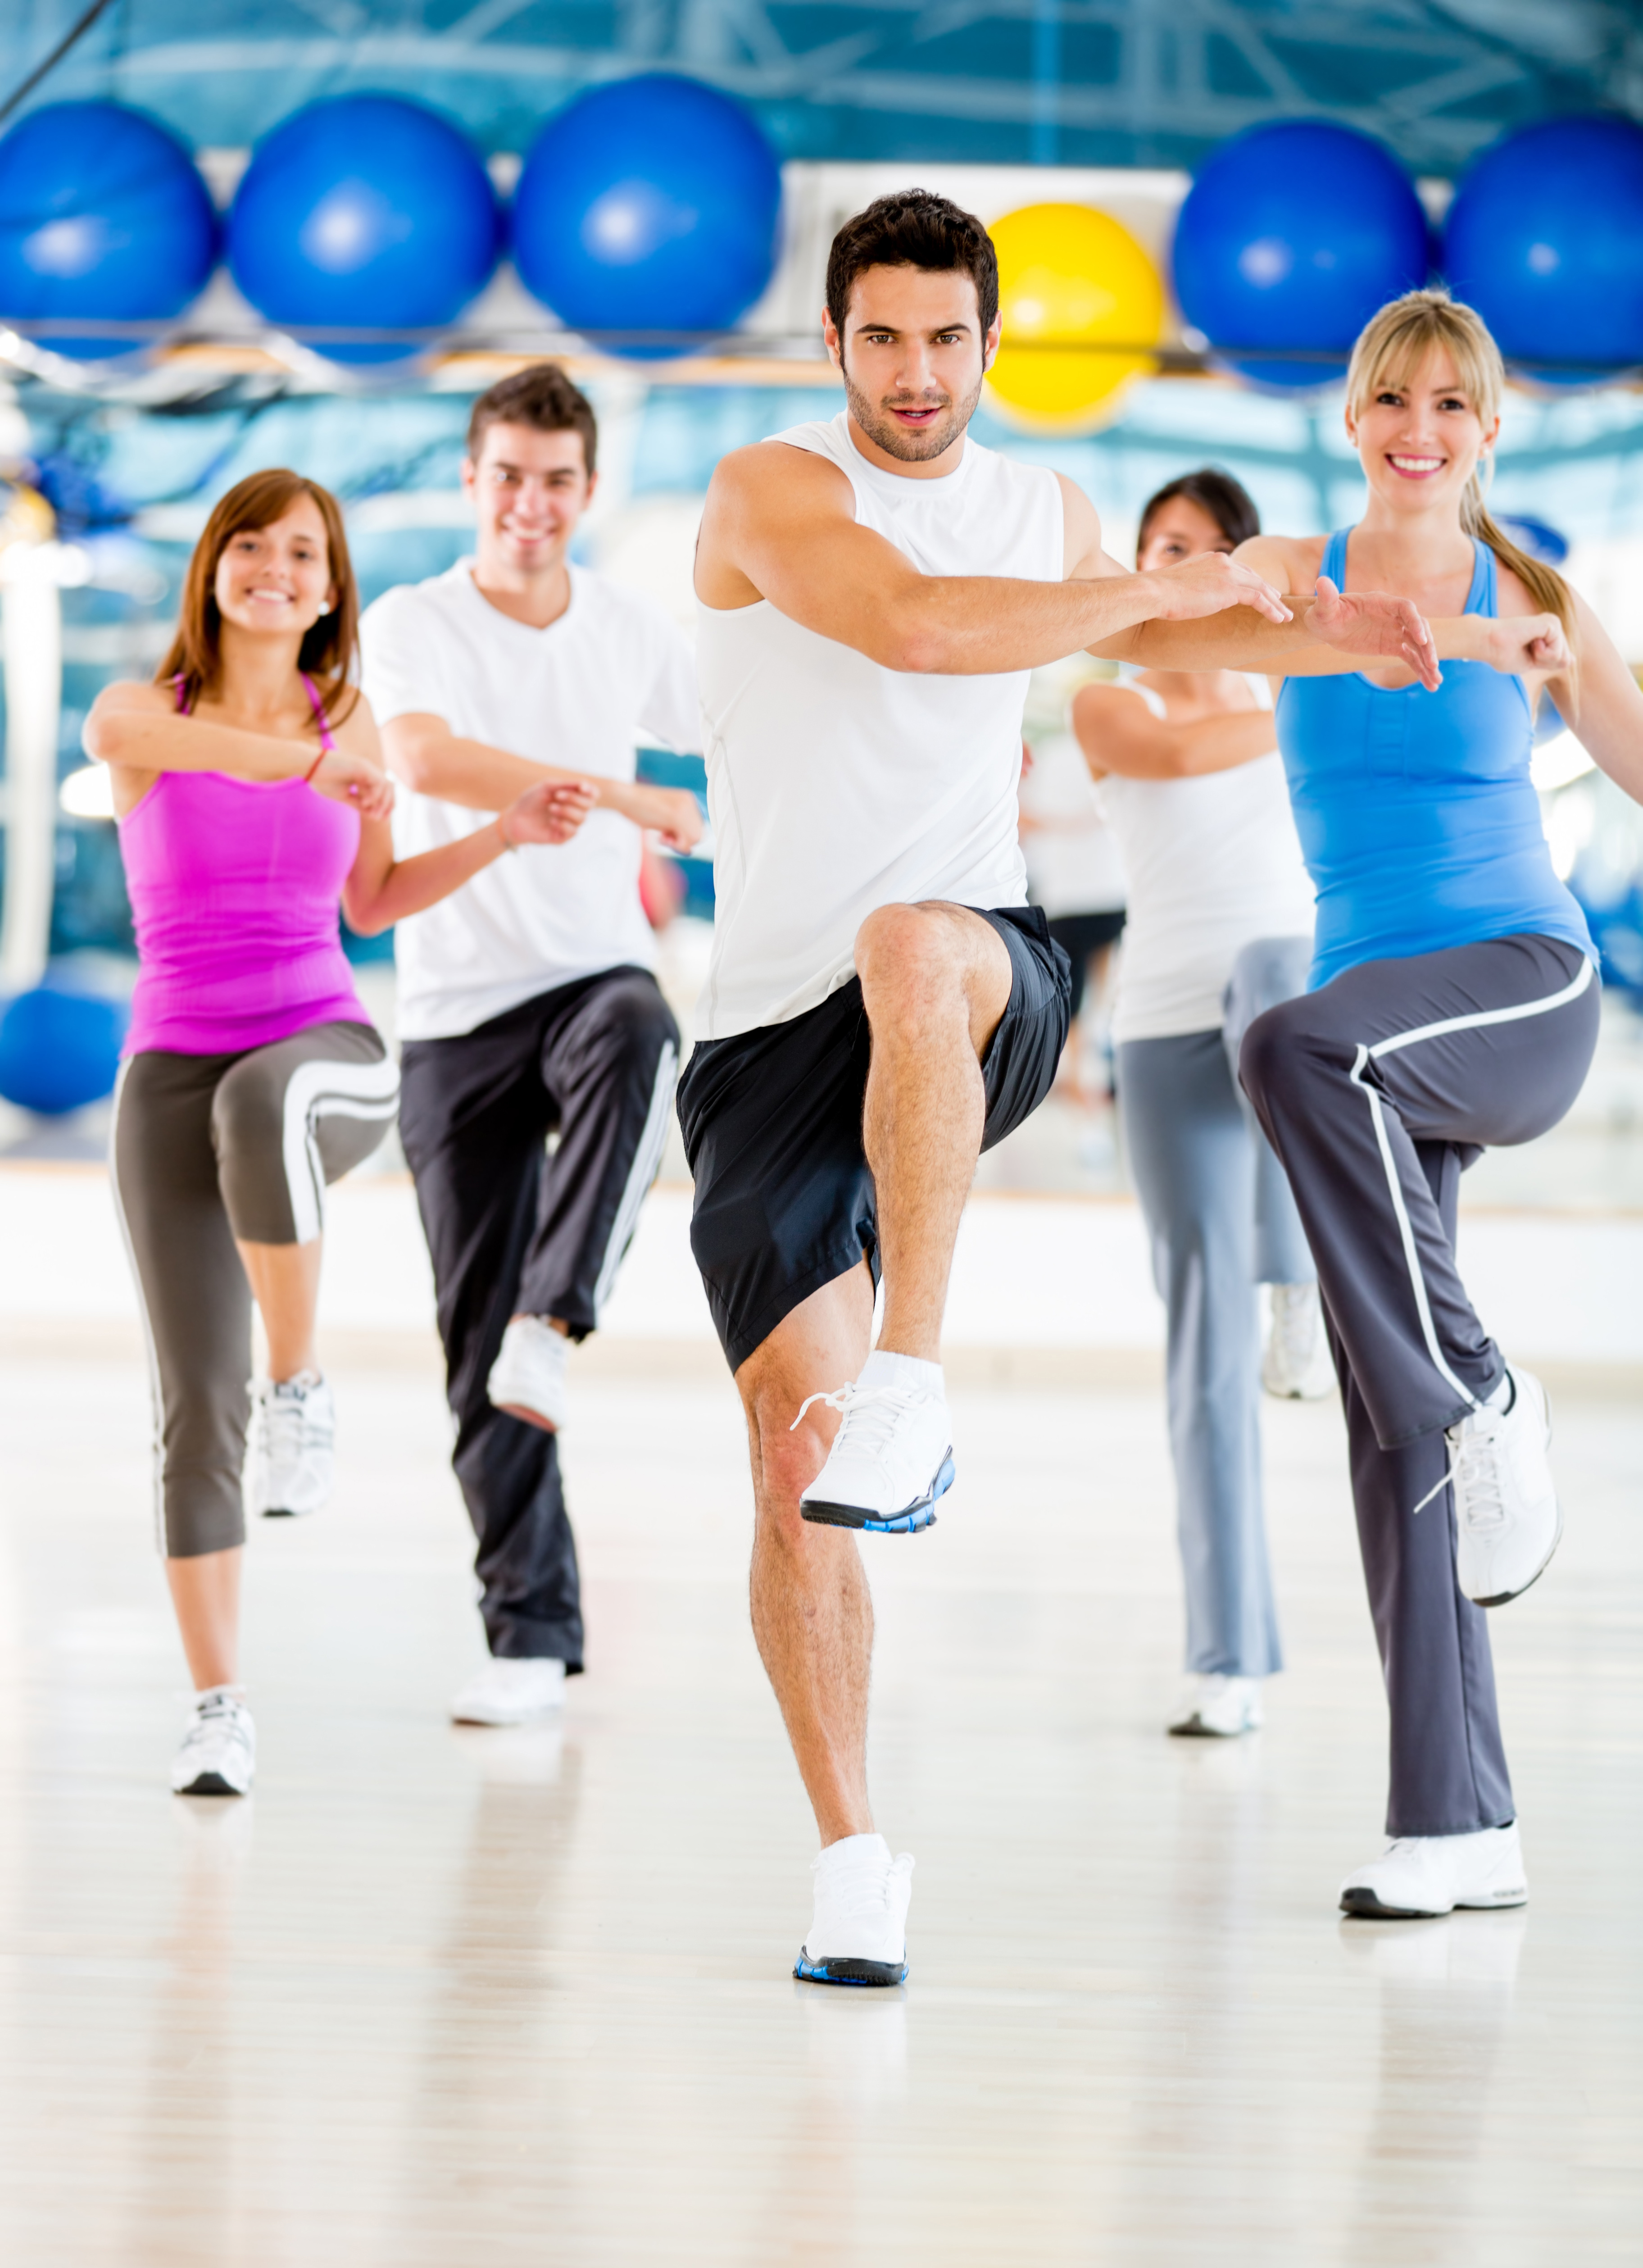 Aerobics class at the gym  The Get Real Video Blog